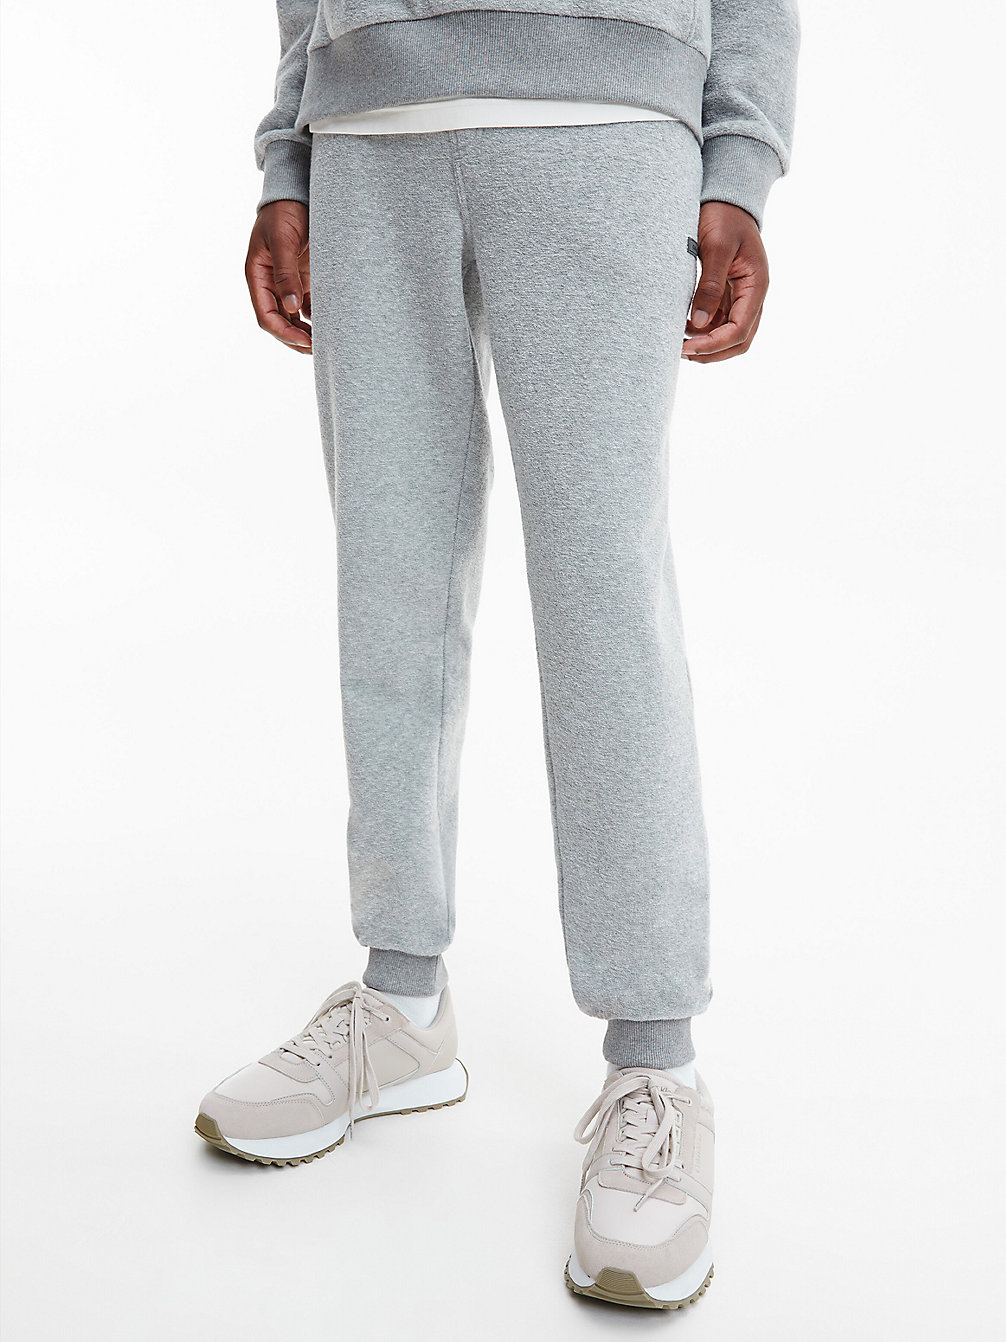 MID GREY HEATHER Relaxed Boucle Fleece Joggers undefined men Calvin Klein